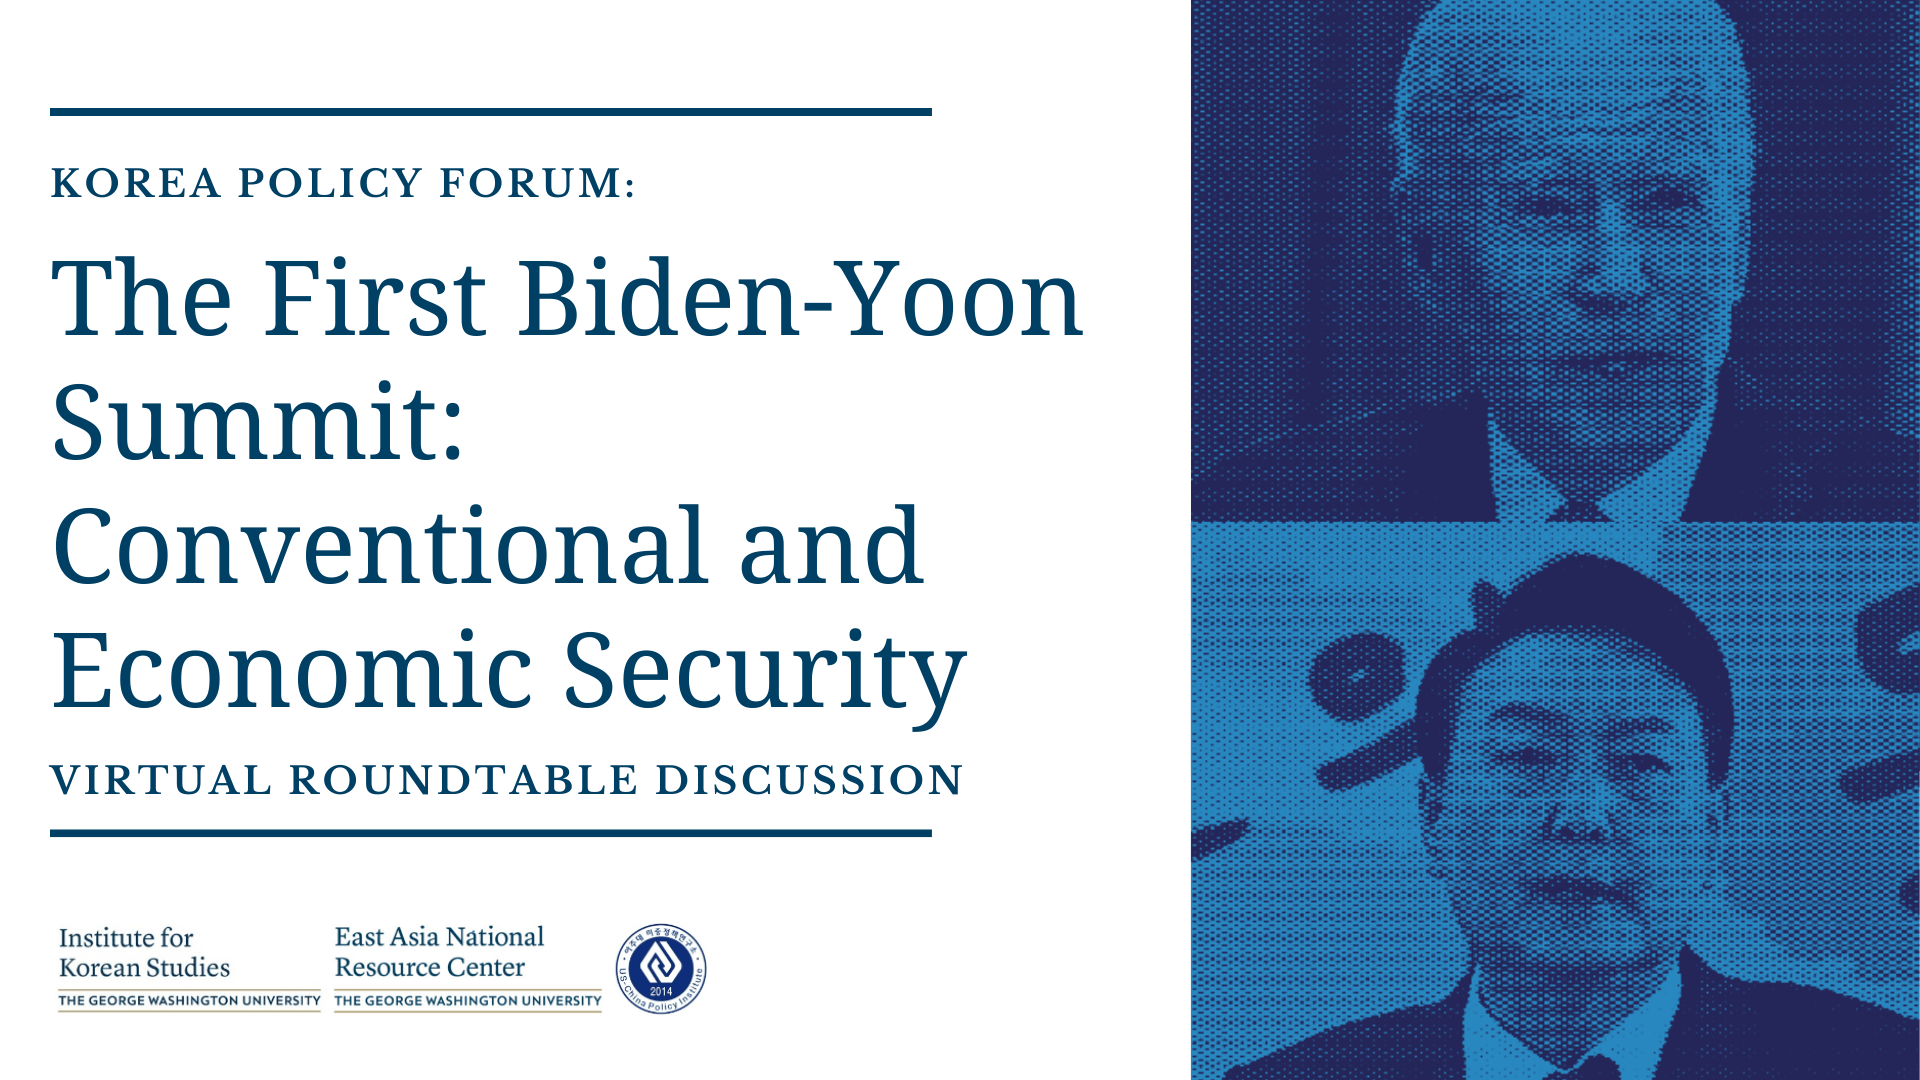 event banner for the The First Biden-Yoon Summit: Conventional and Economic Security event